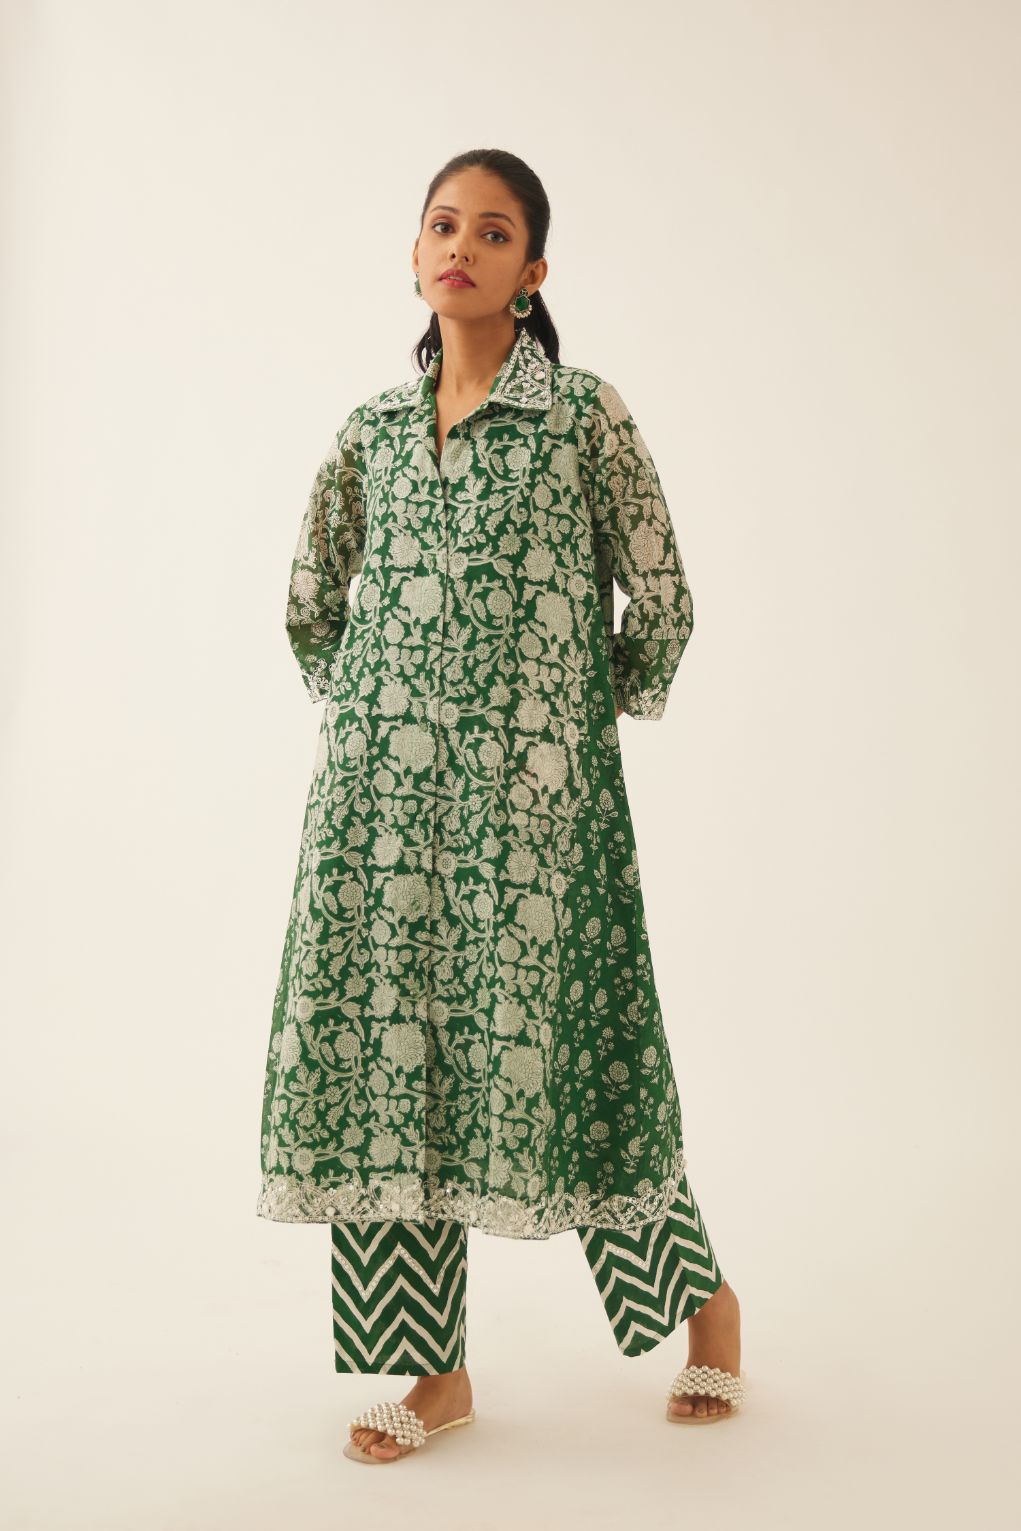 Green hand block printed A-line short kurta with sequins, tassels and bead work, paired with green & off white cotton hand block printed straight pants detailed with sequin and bead work at hem.